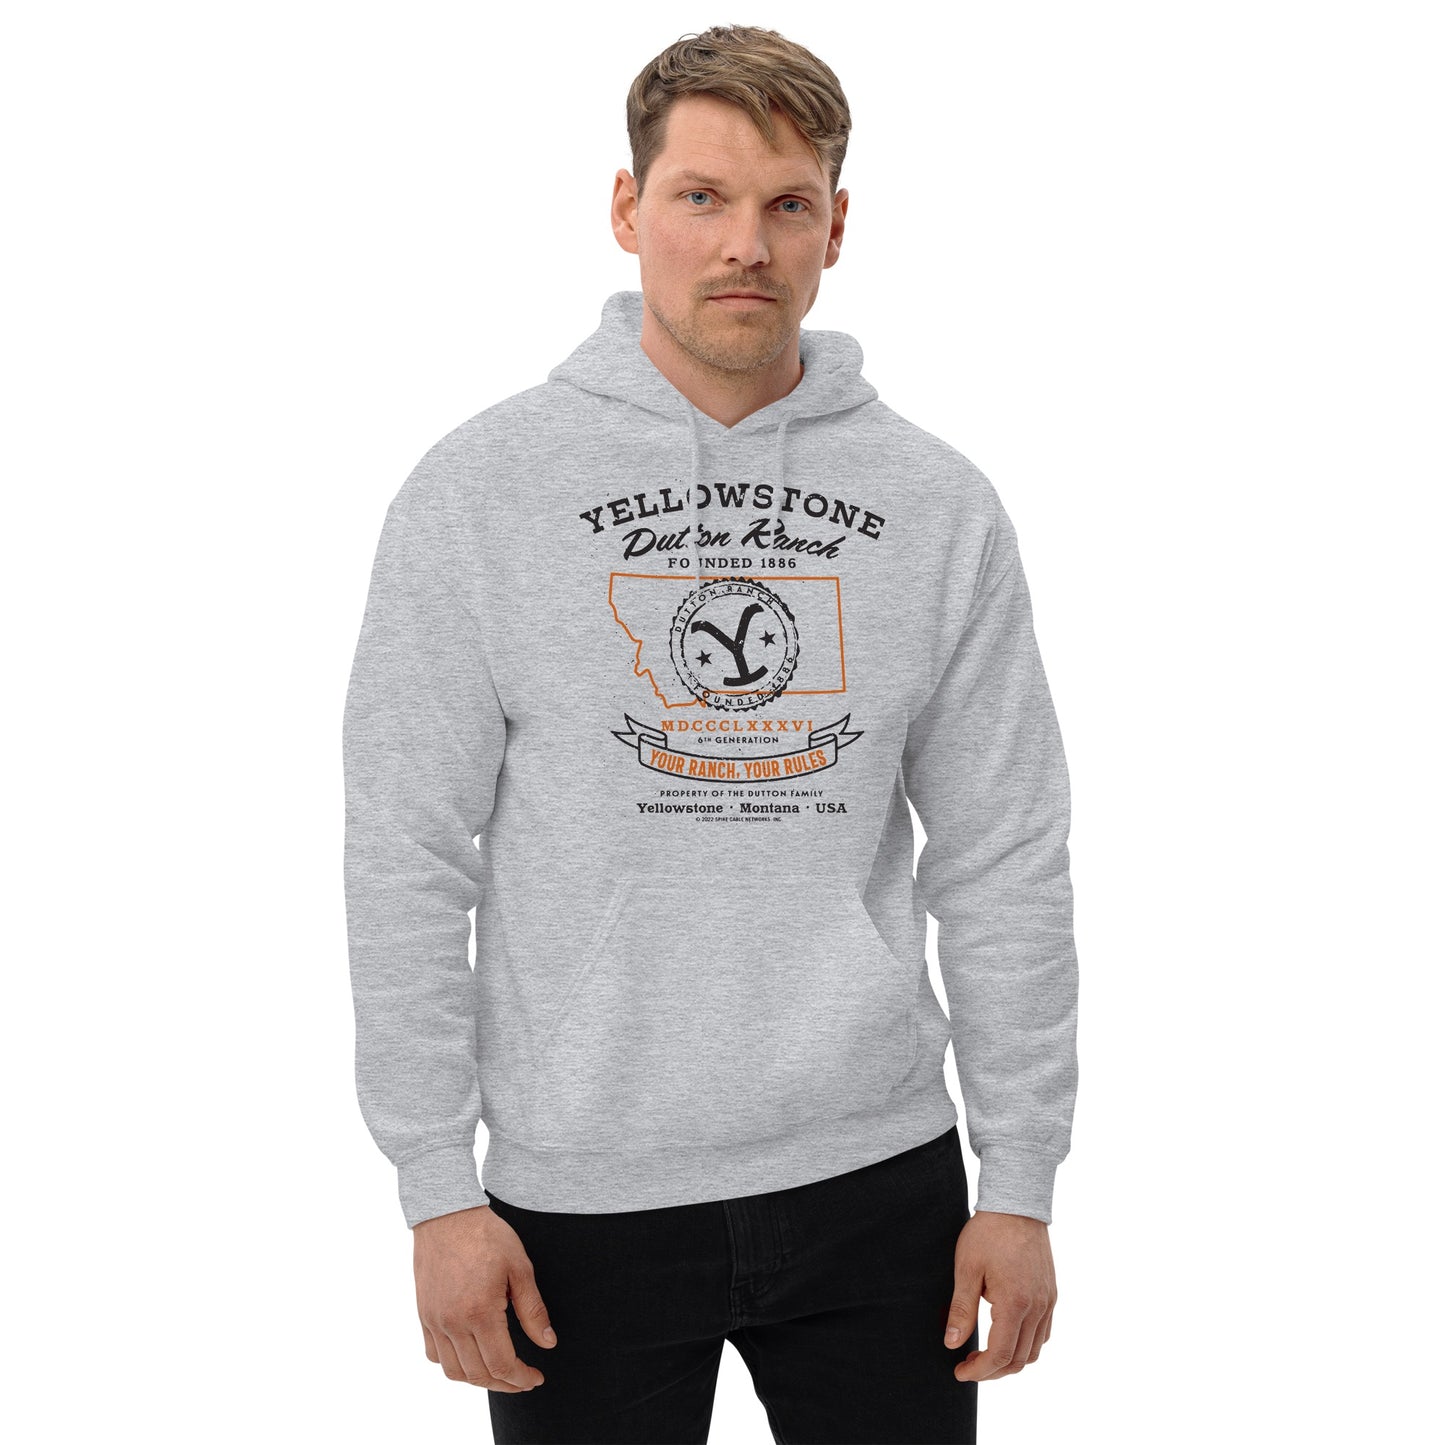 Yellowstone Dutton Ranch Your Ranch Your Rules Hooded Sweatshirt